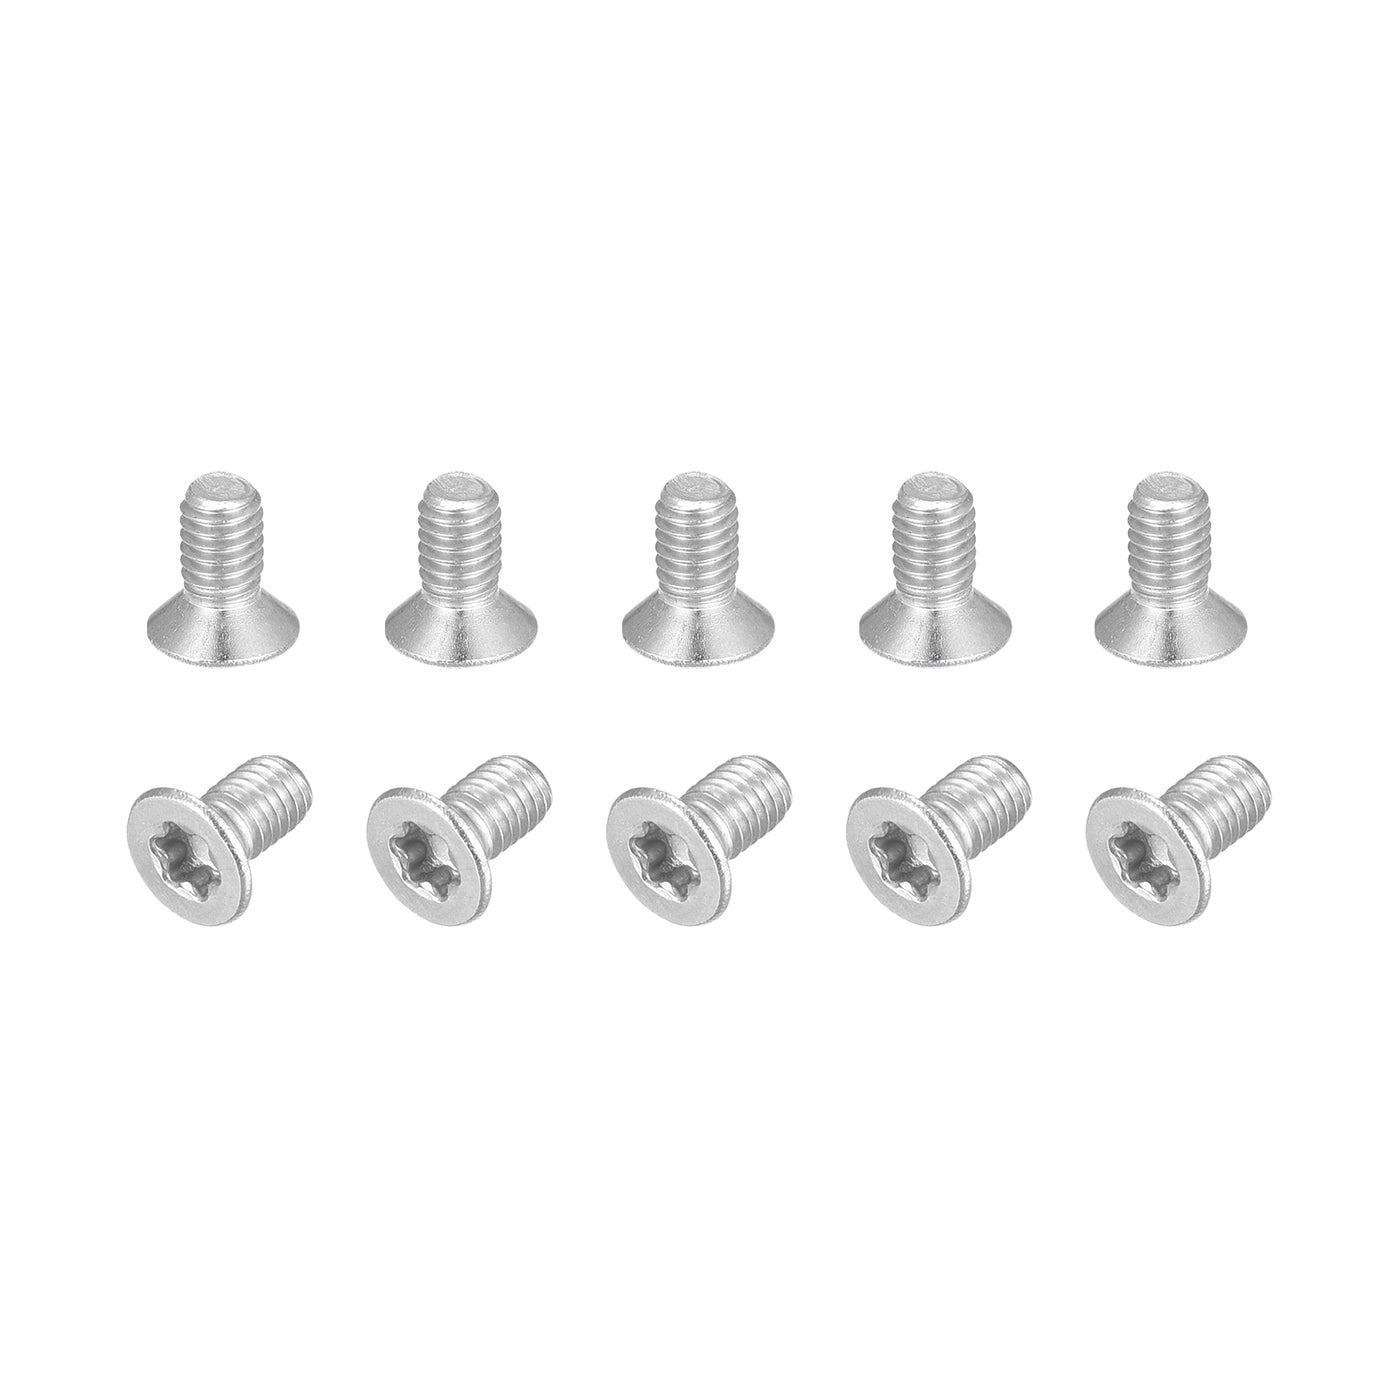 uxcell Uxcell M3x5mm Torx Security Screws, 20pcs 316 Stainless Steel Countersunk Head Screw